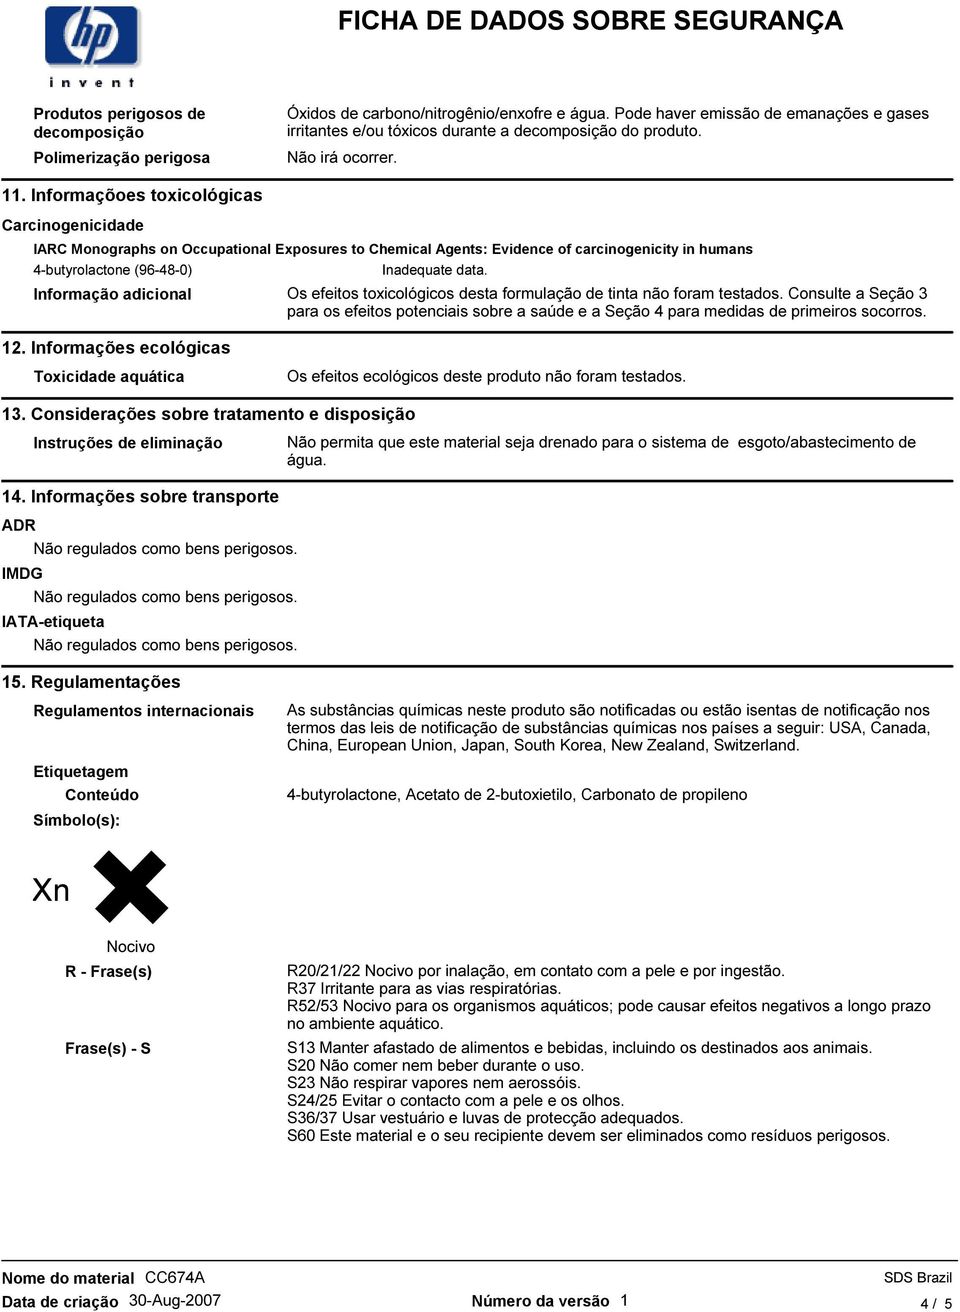 Informaçõoes toxicológicas Carcinogenicidade IARC Monographs on Occupational Exposures to Chemical Agents: Evidence of carcinogenicity in humans (96-48-0) Inadequate data.